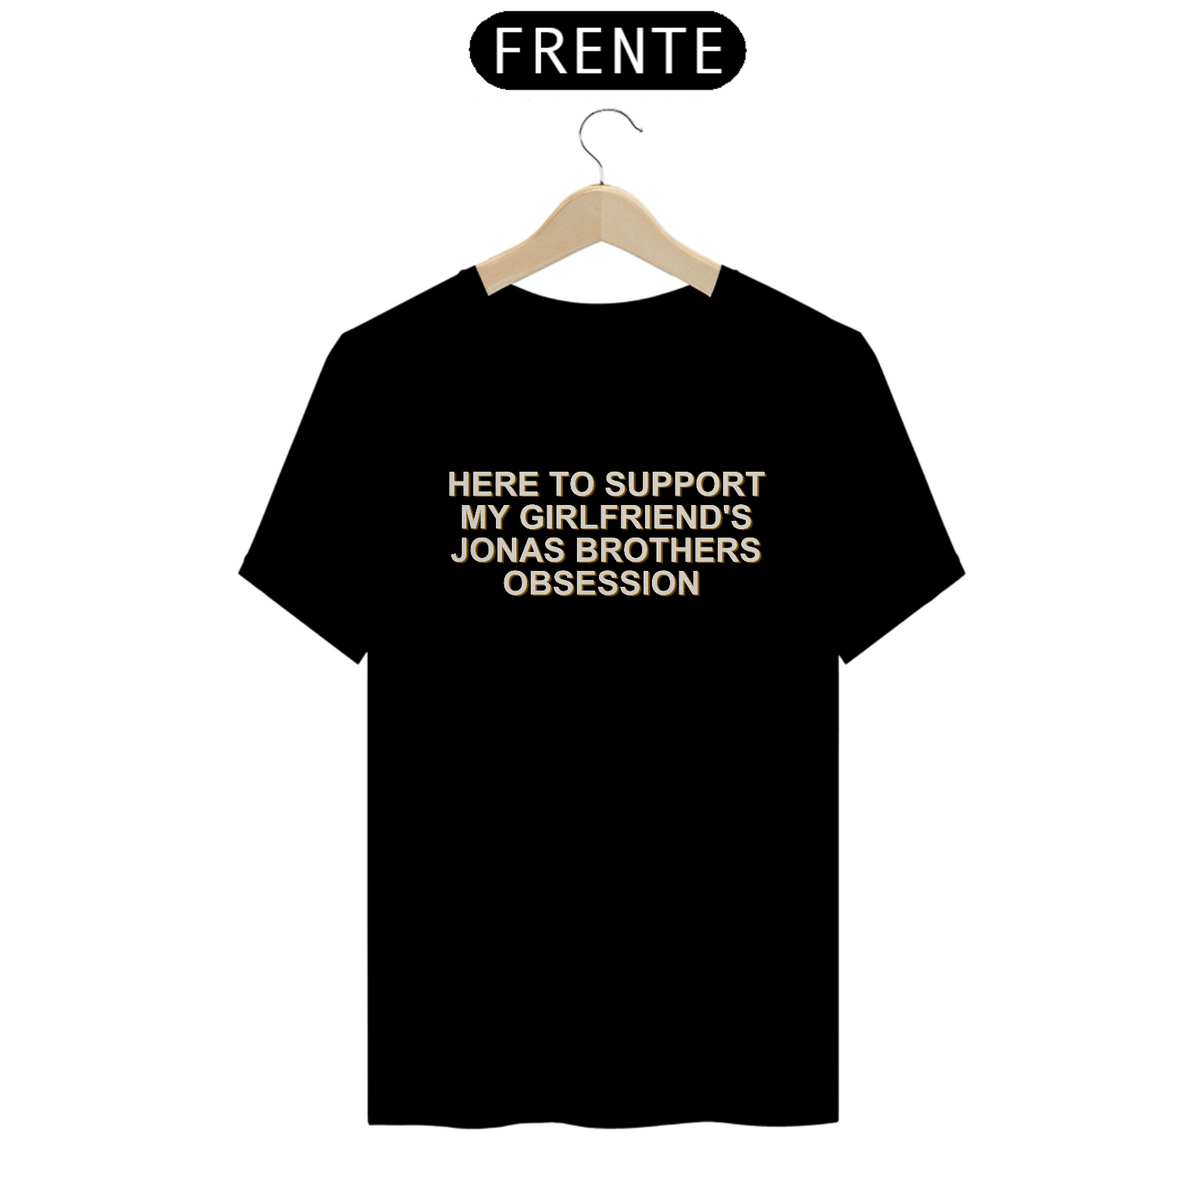 Nome do produto: CAMISA - HERE TO SUPPORT MY GIRLFRIEND\'S JB OBSESSION | JONAS BROTHERS